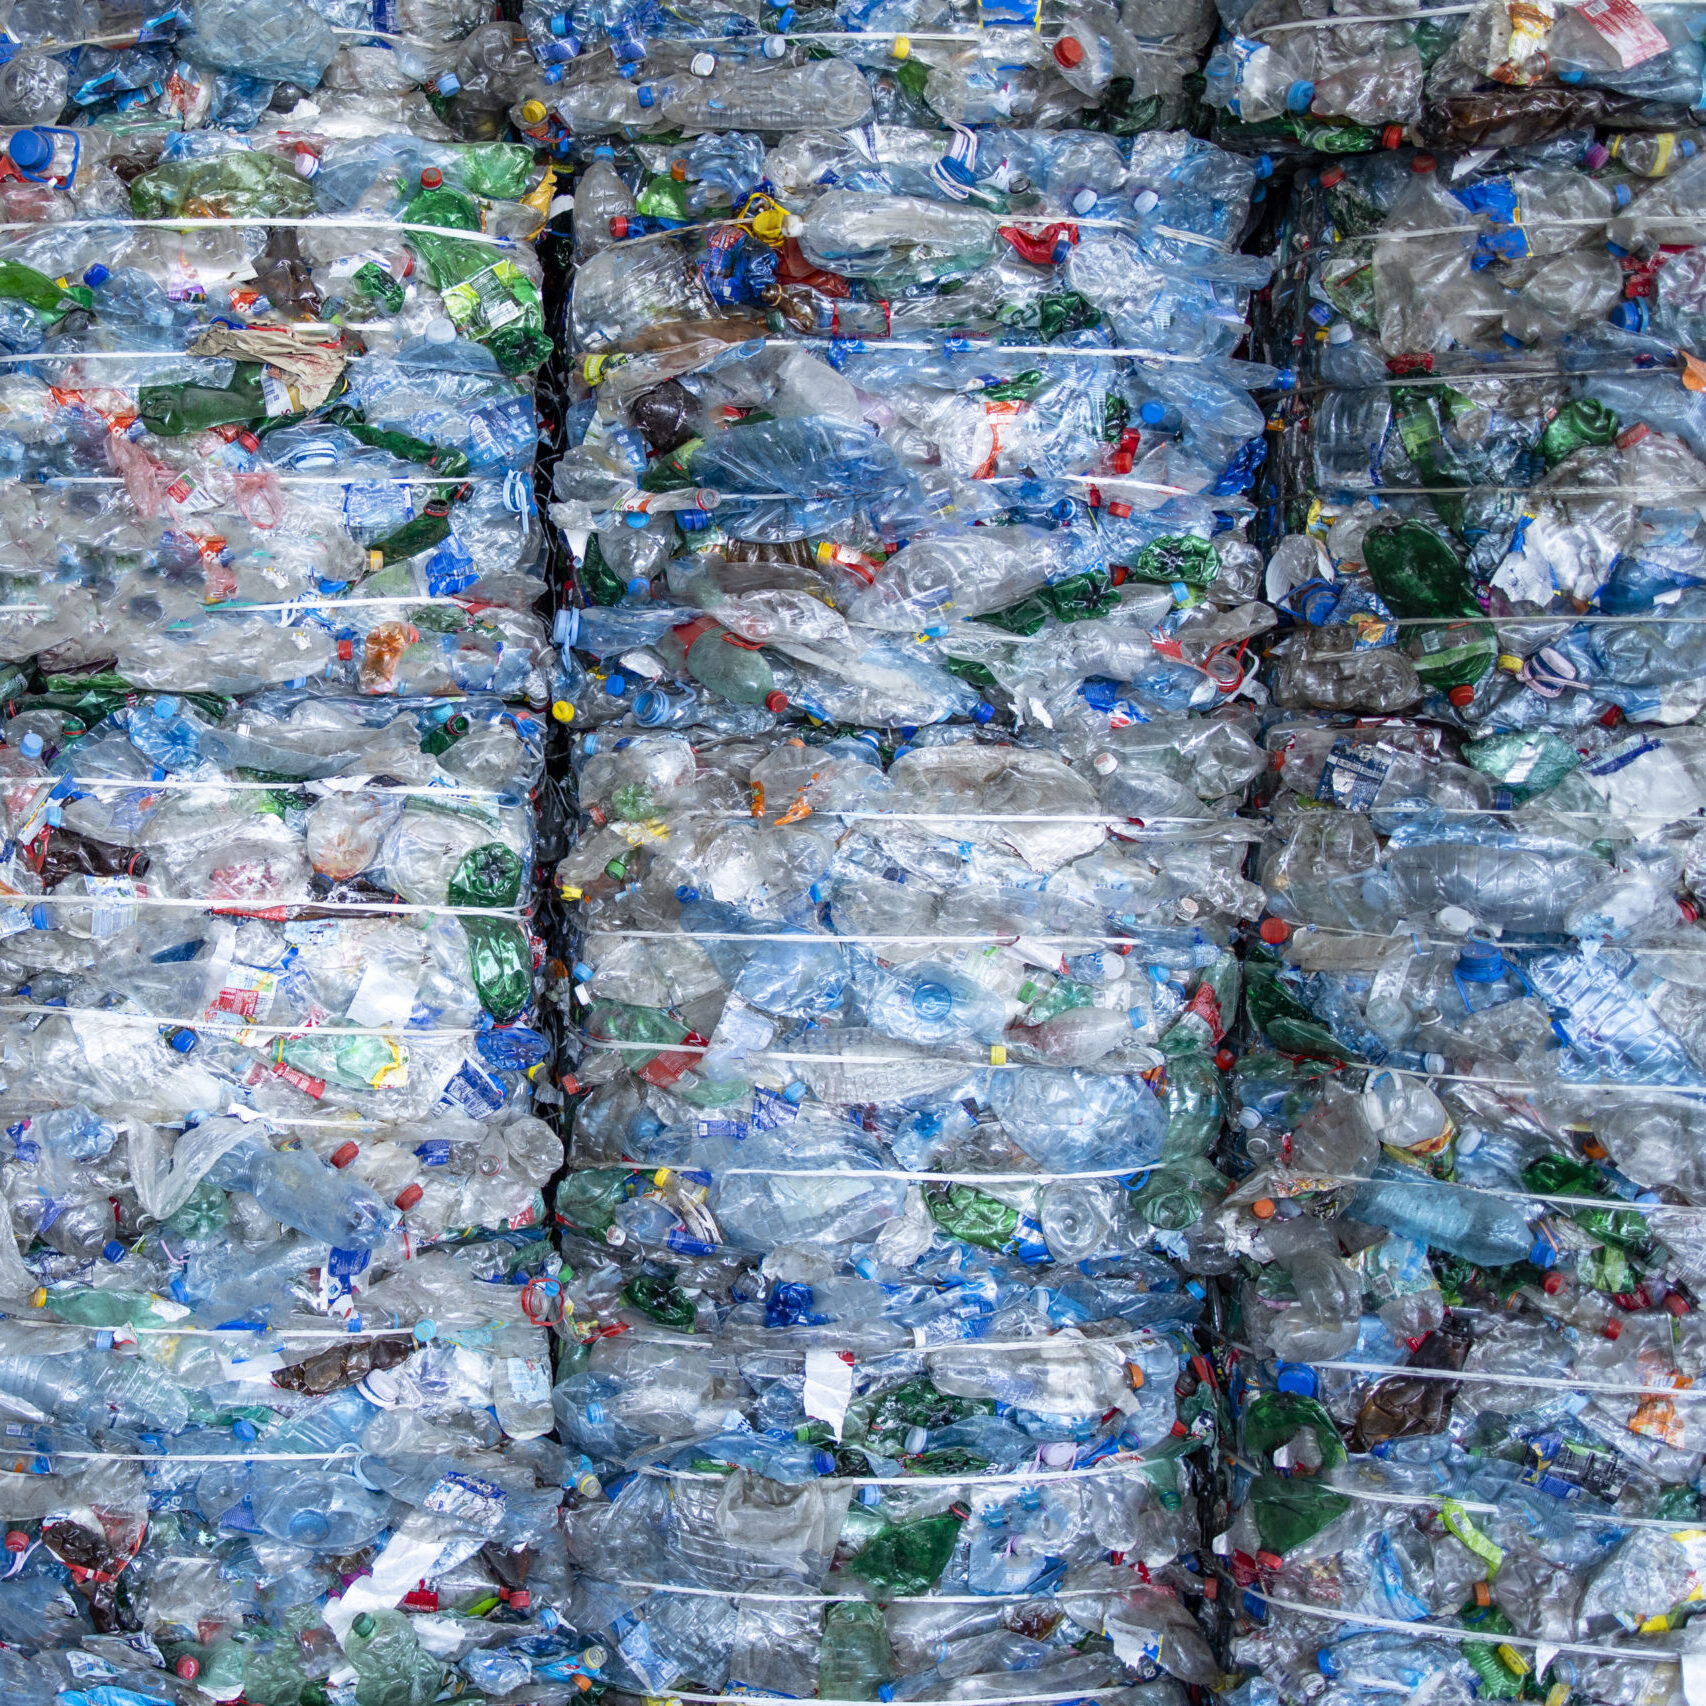 Large pile of plastic PET bottles compressed and ready for recycling.